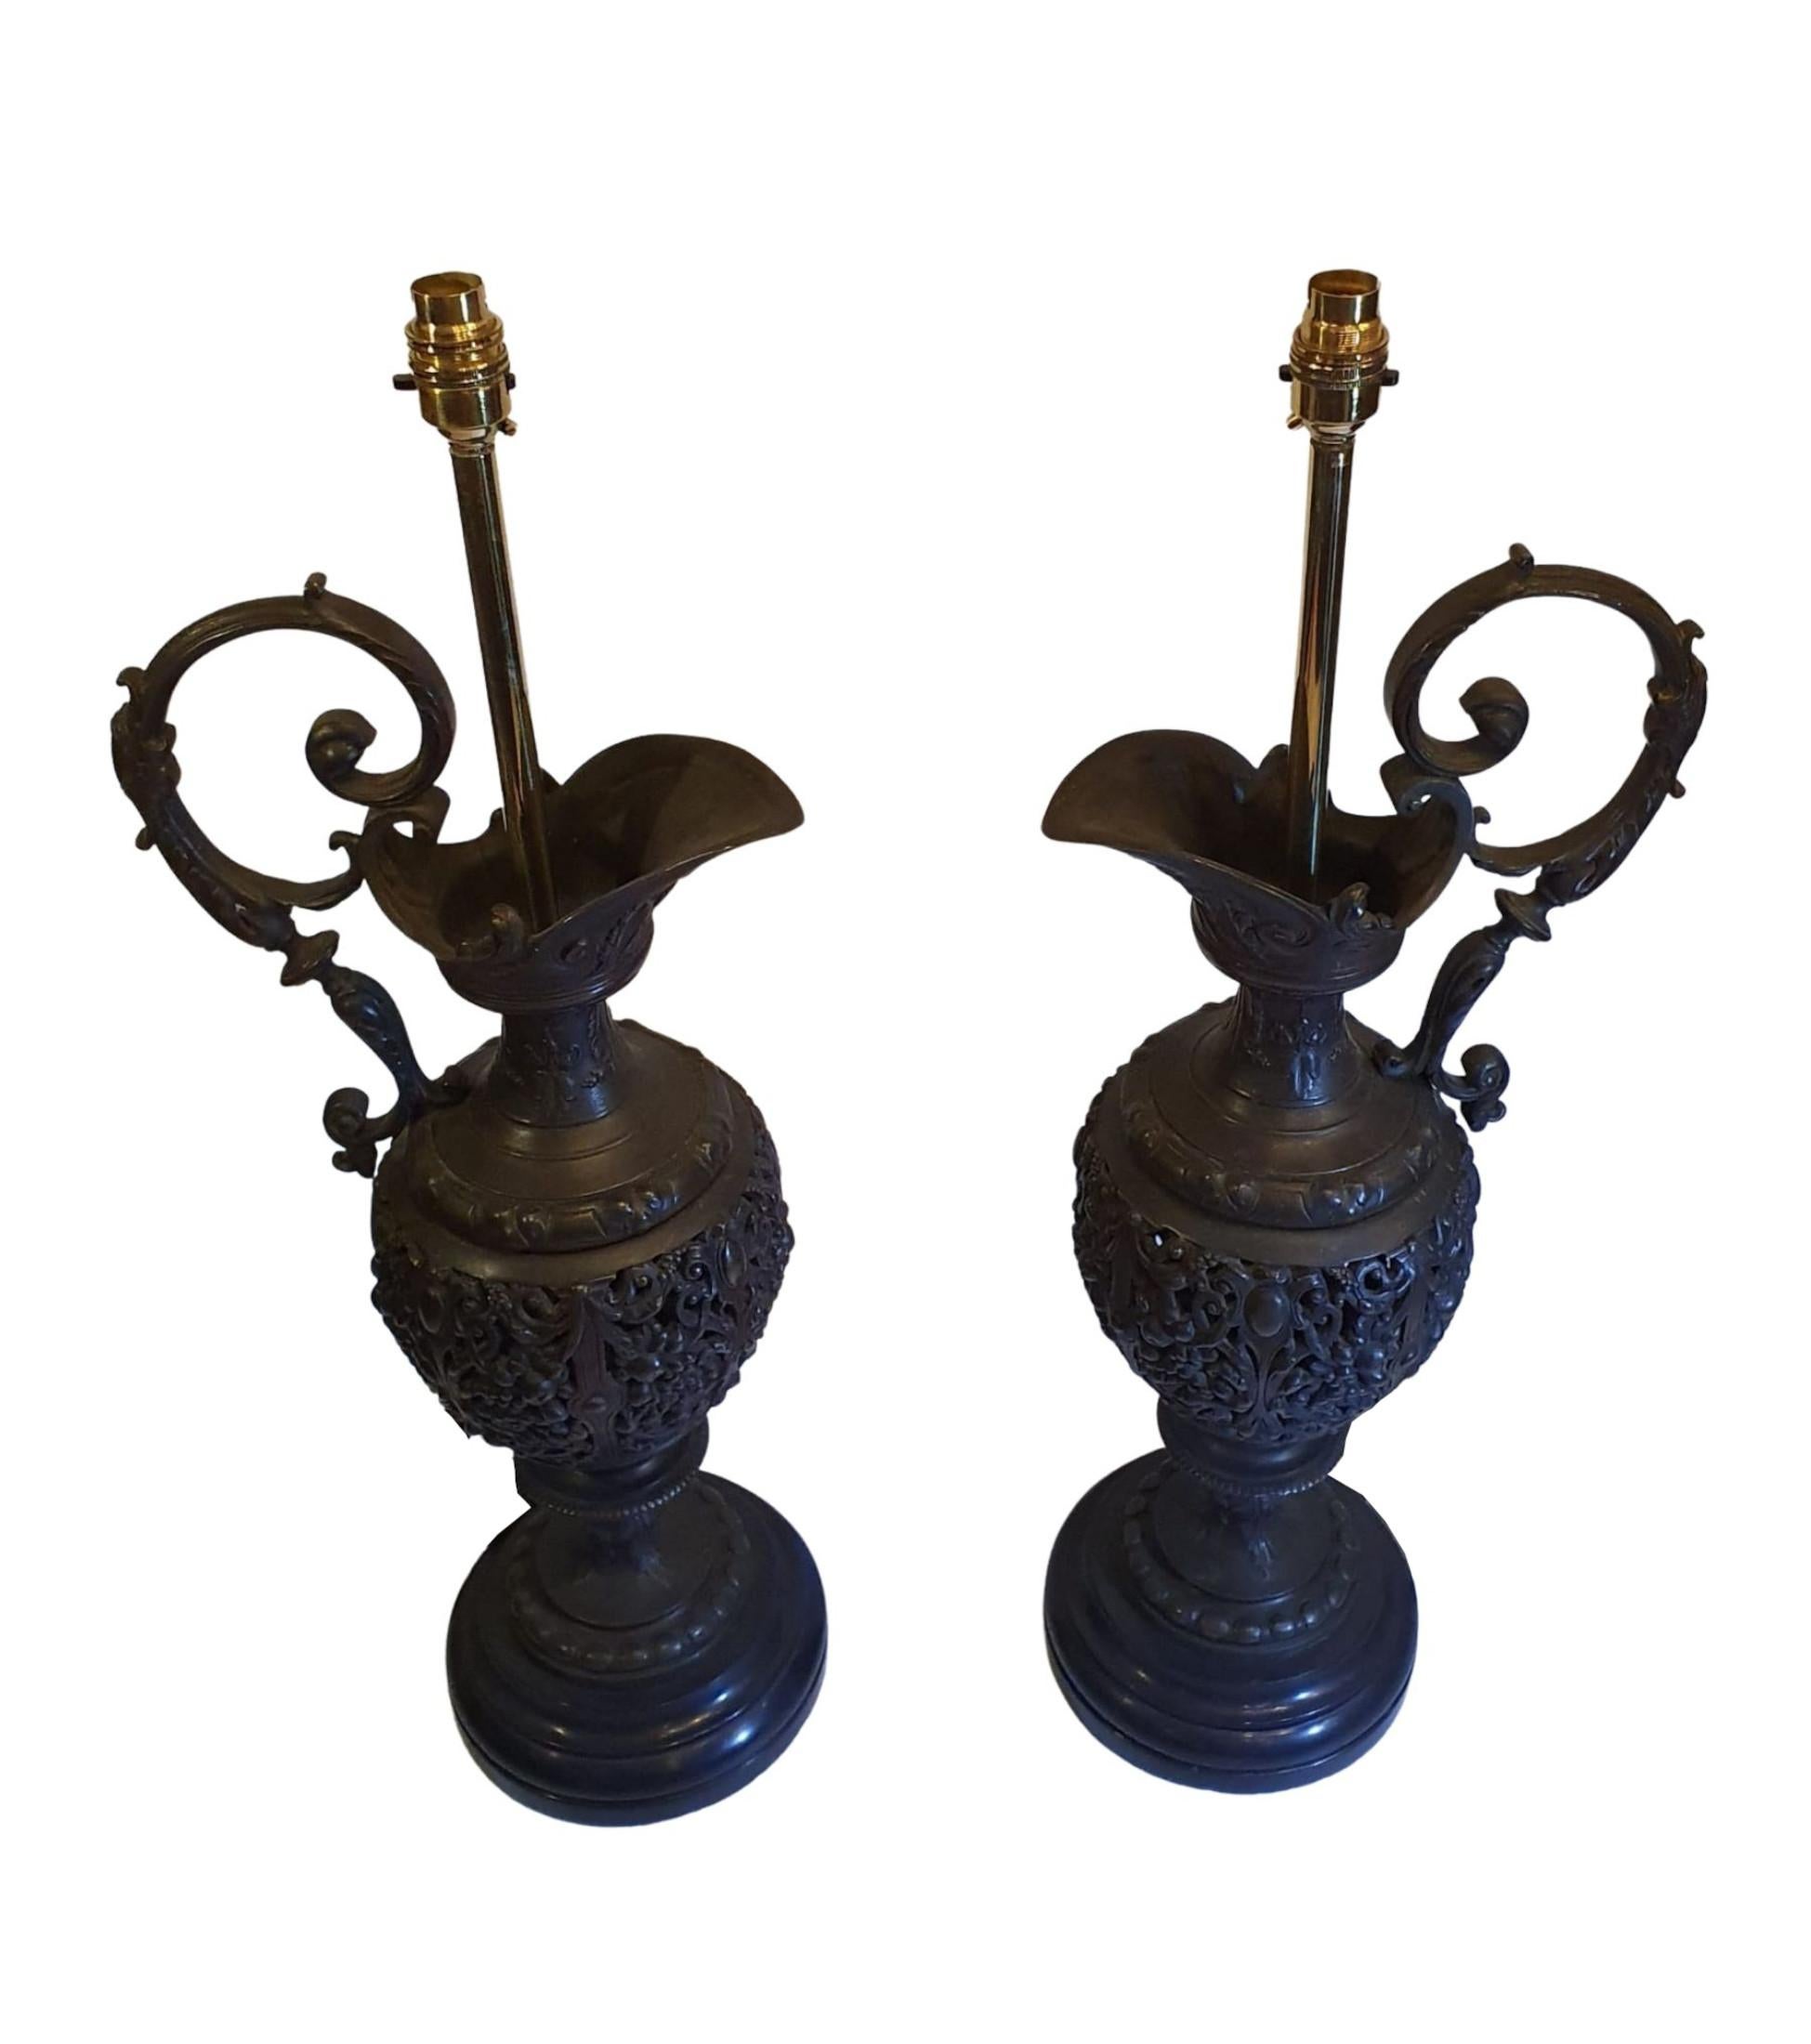 A very rare pair of 19th Century bronze ewers converted to table lamps. The beautifully relief cast body depicting elaborate scroll and foliate motif detail with elegant scrolling handles supported on waisted stem with beaded detail terminating on